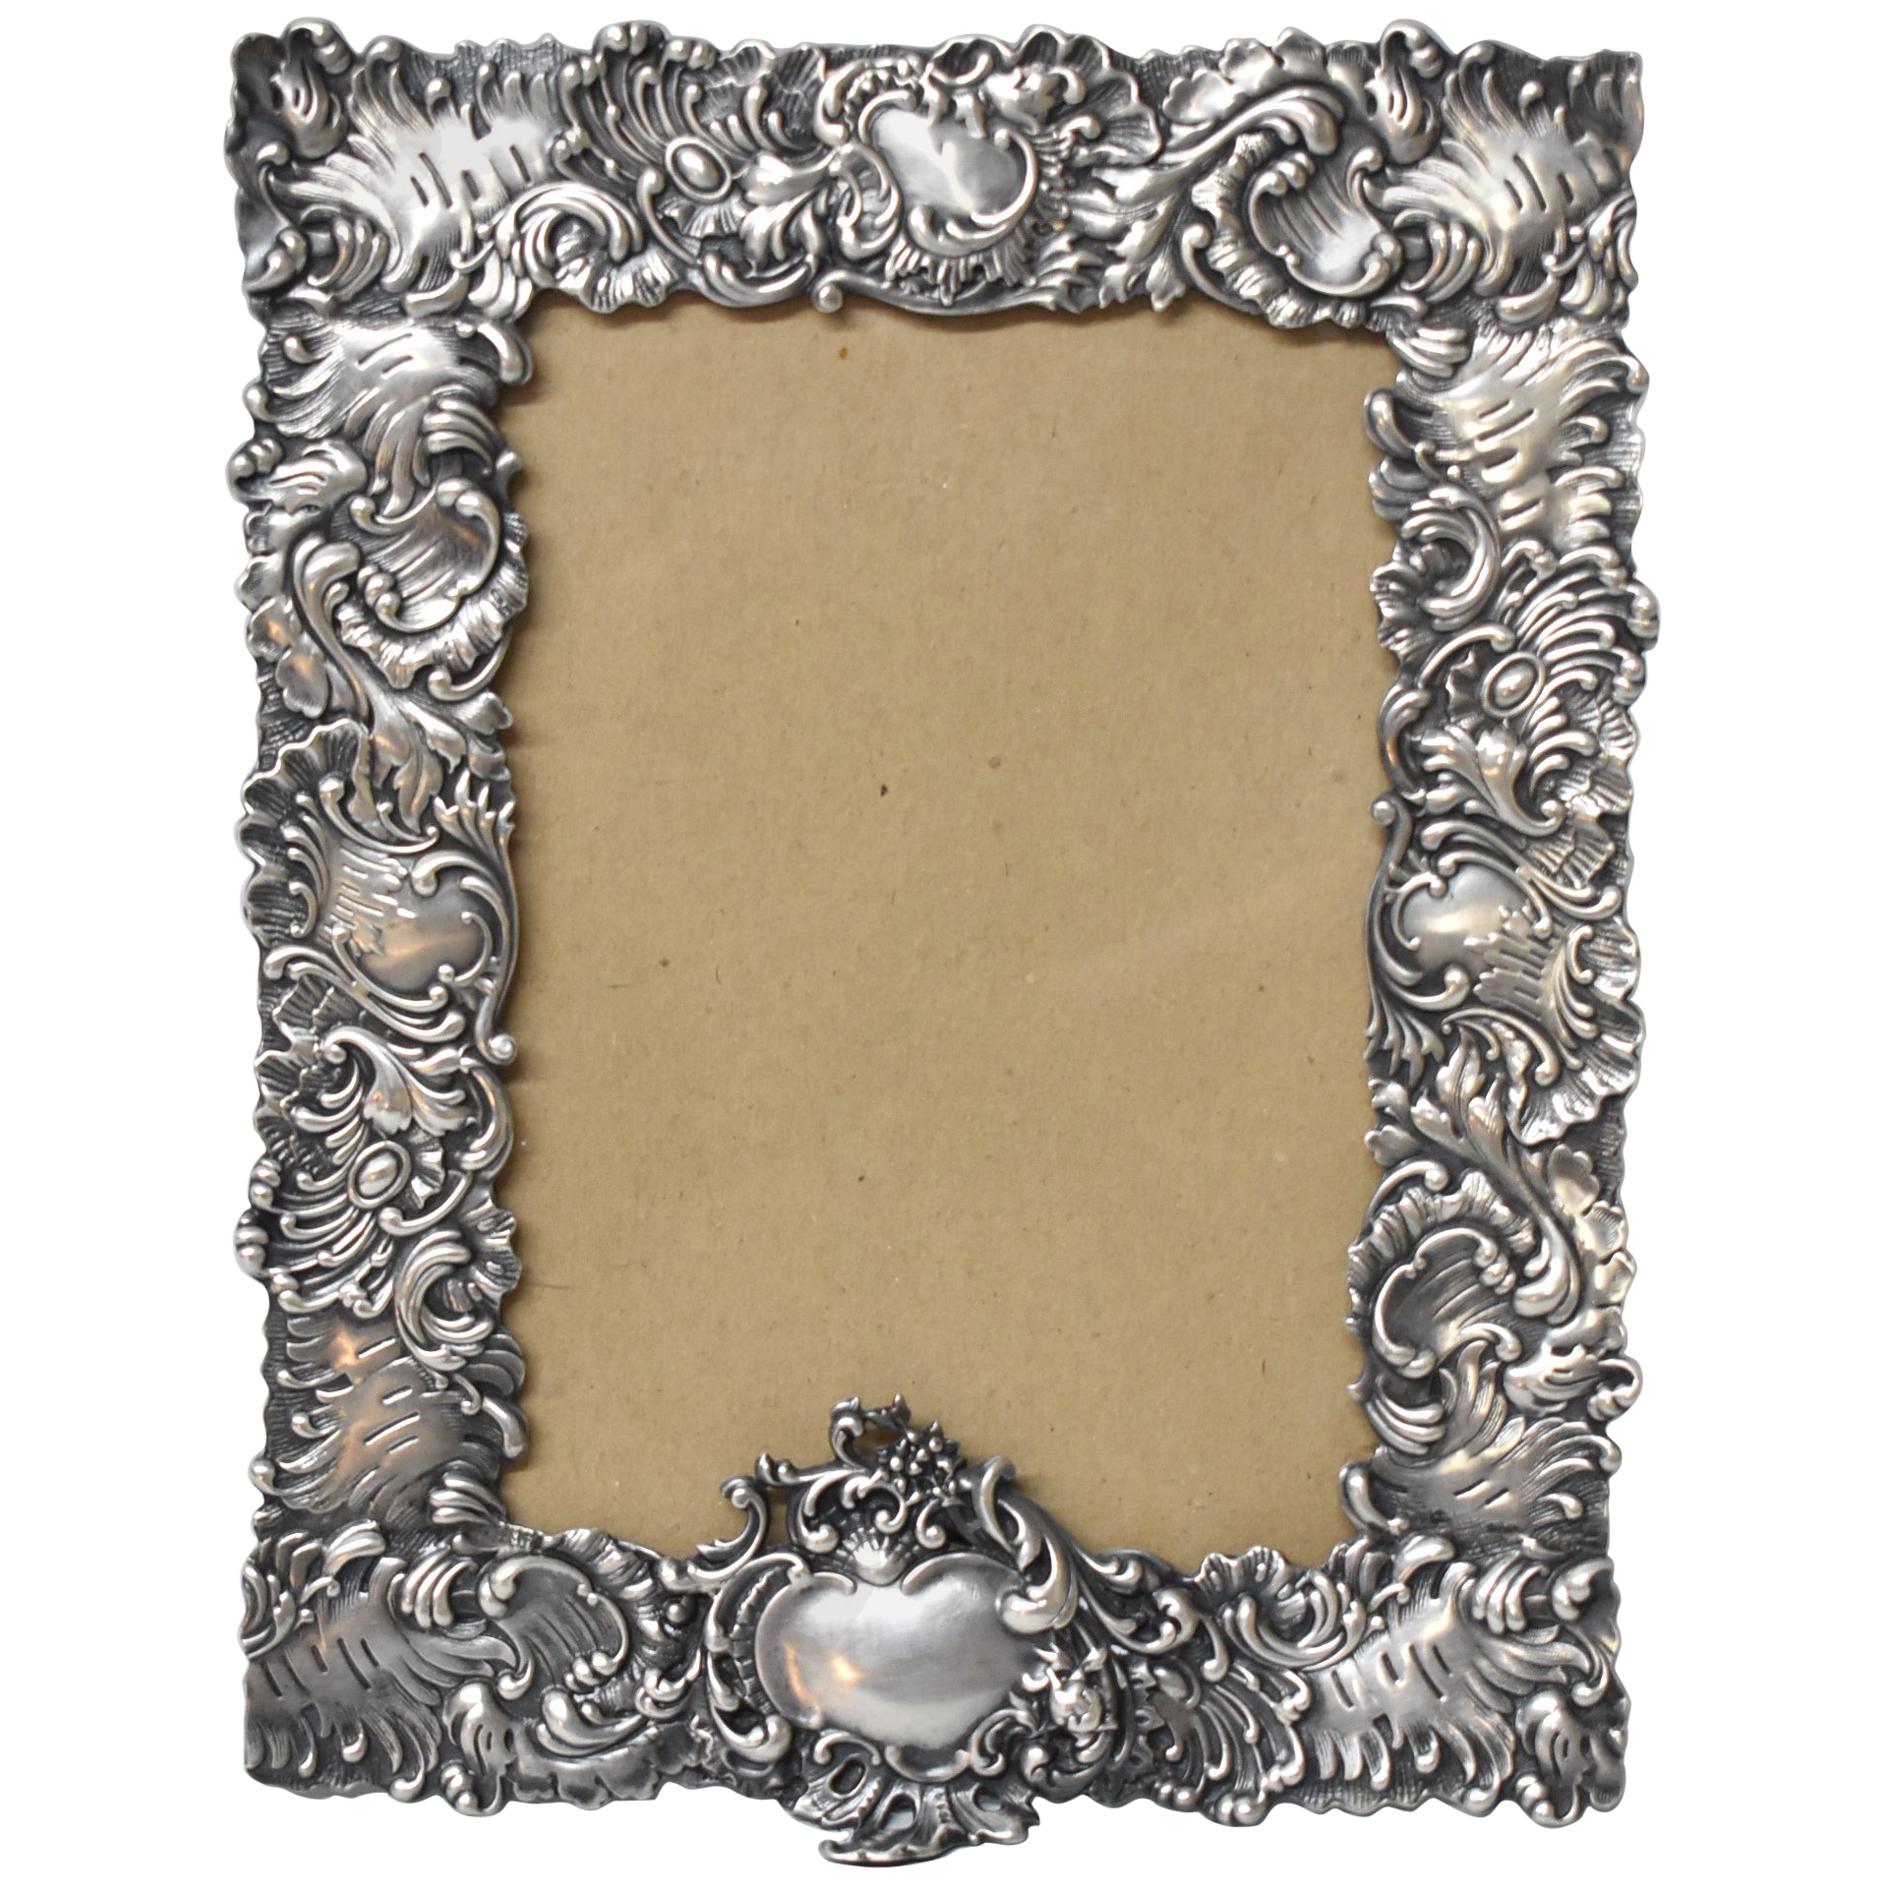 5 X 7 Hand Painted Antique Silver Easel Back Photo Frame 